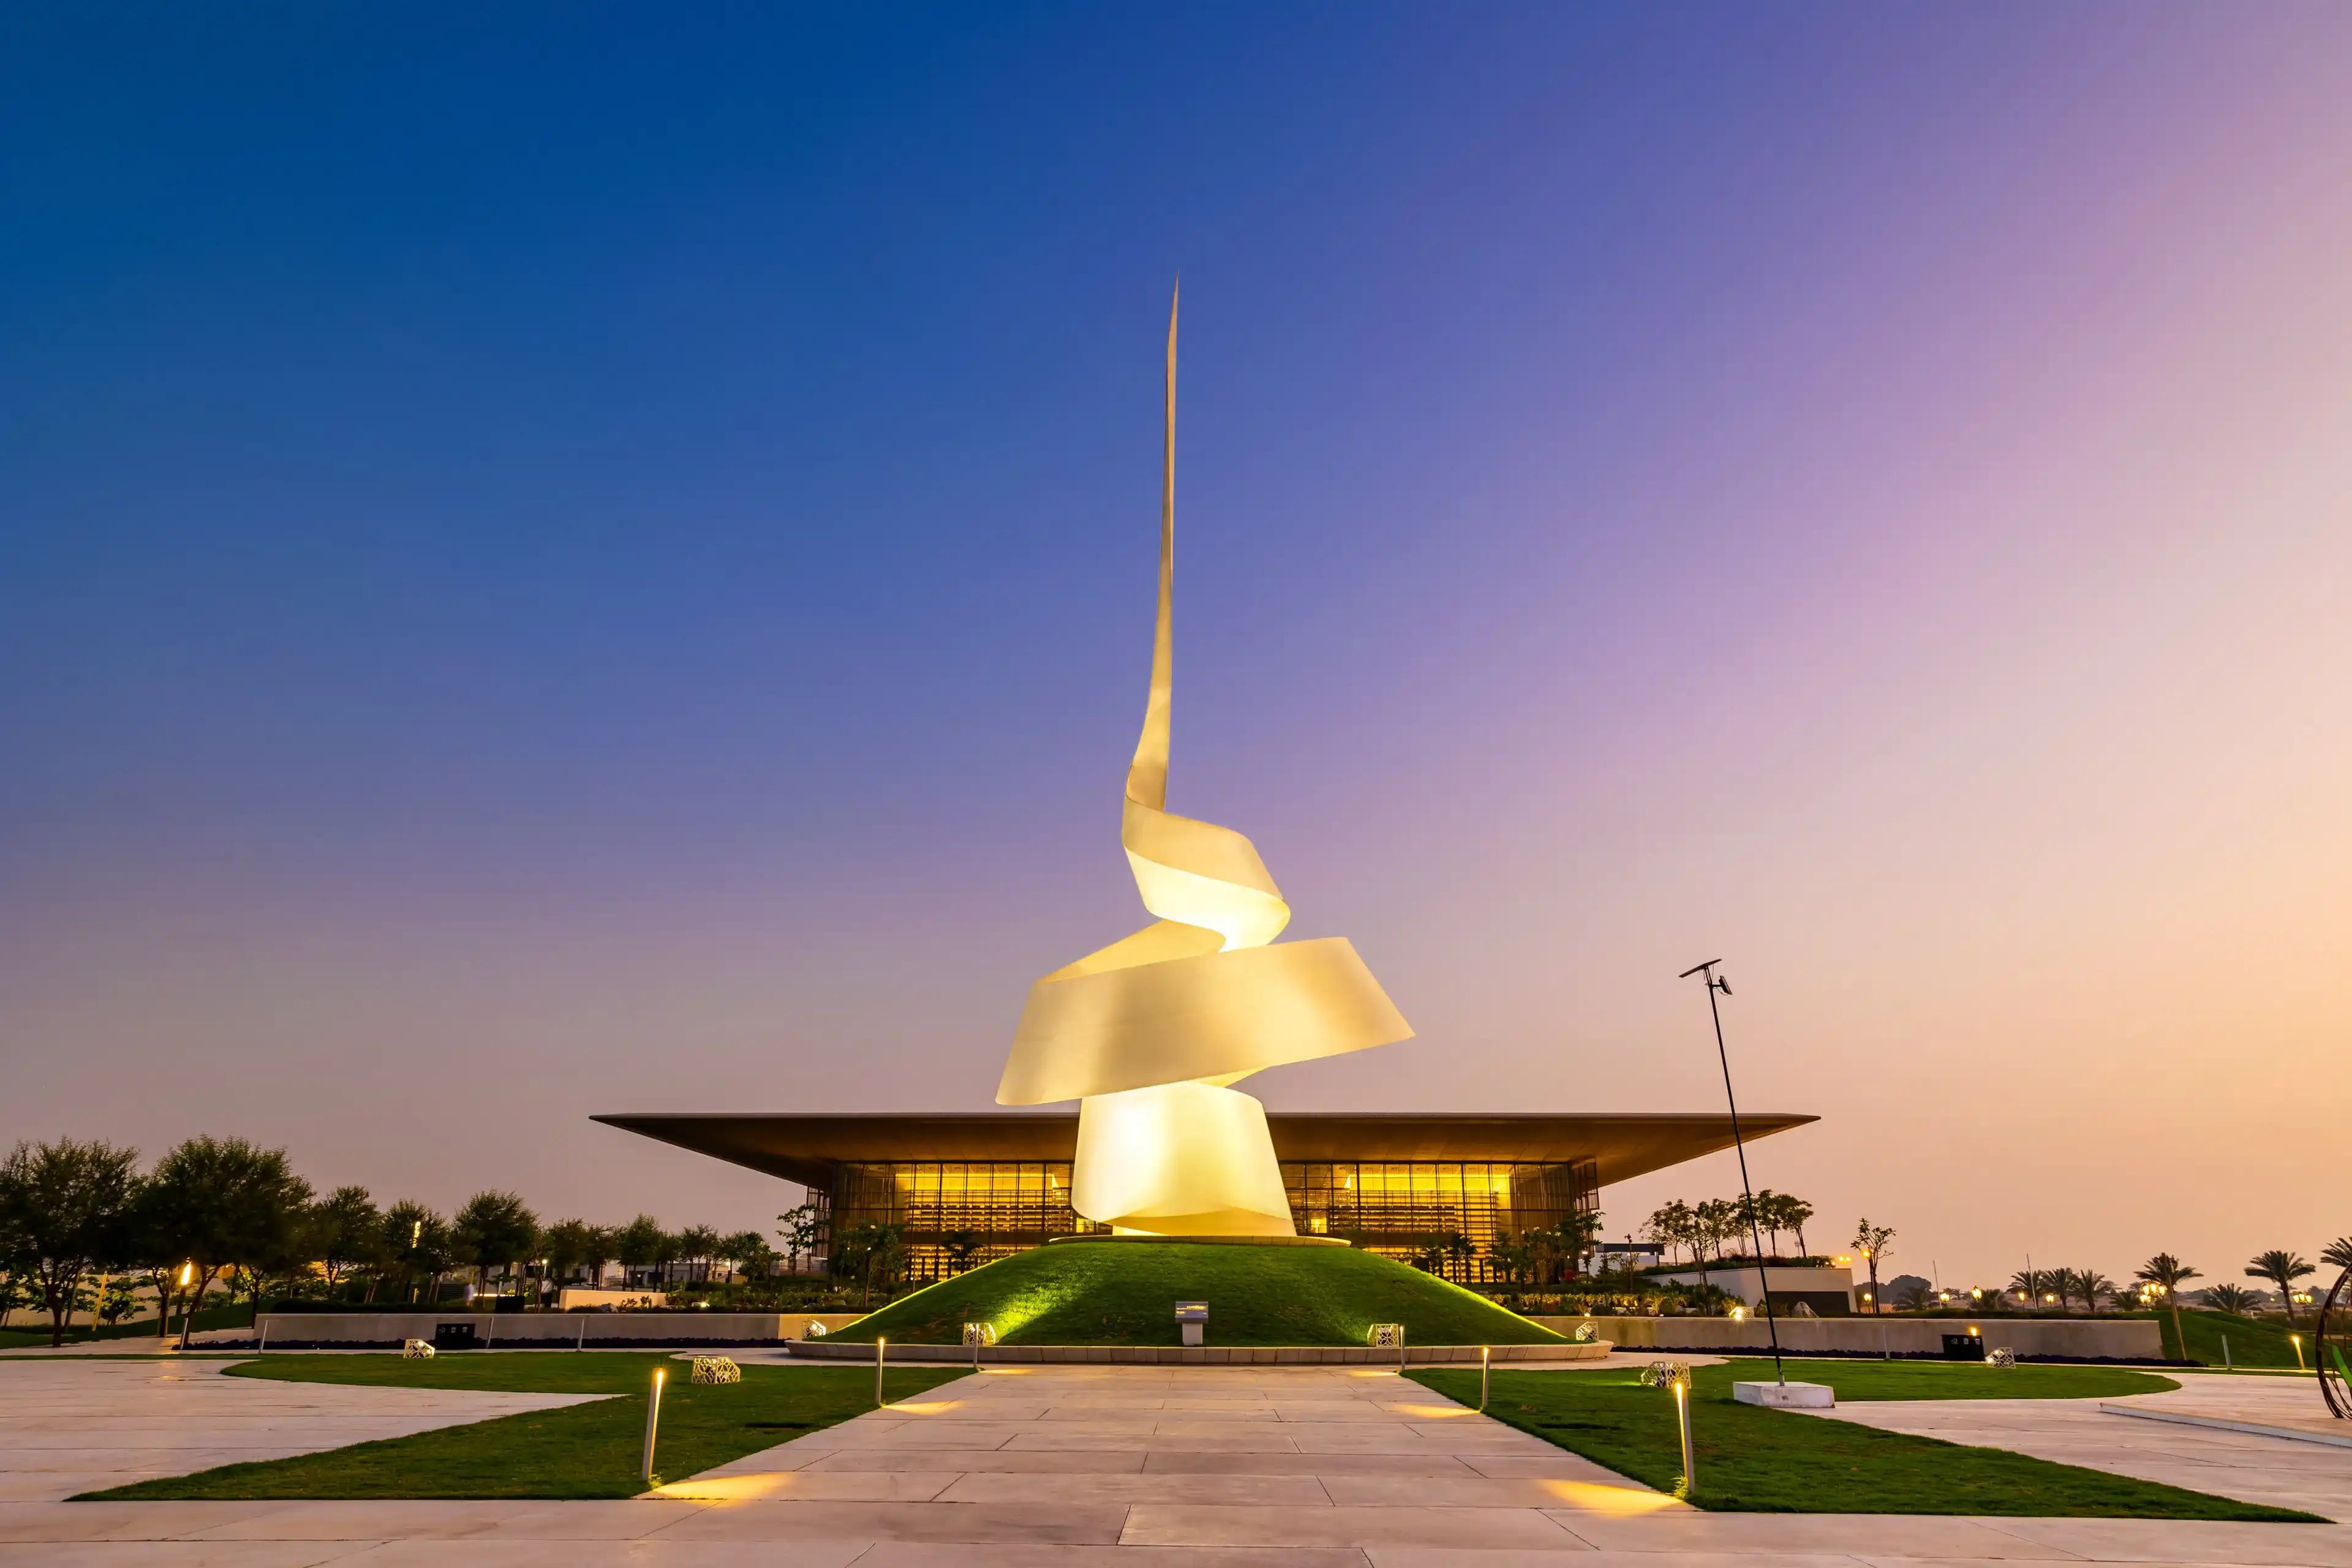 Sharjah, UAE - March 30 2022: Beautiful shot of Sharjah House of Wisdom in the evening. House of Wisdom is a new and hi tech digital library which is in Sharjah, UAE.